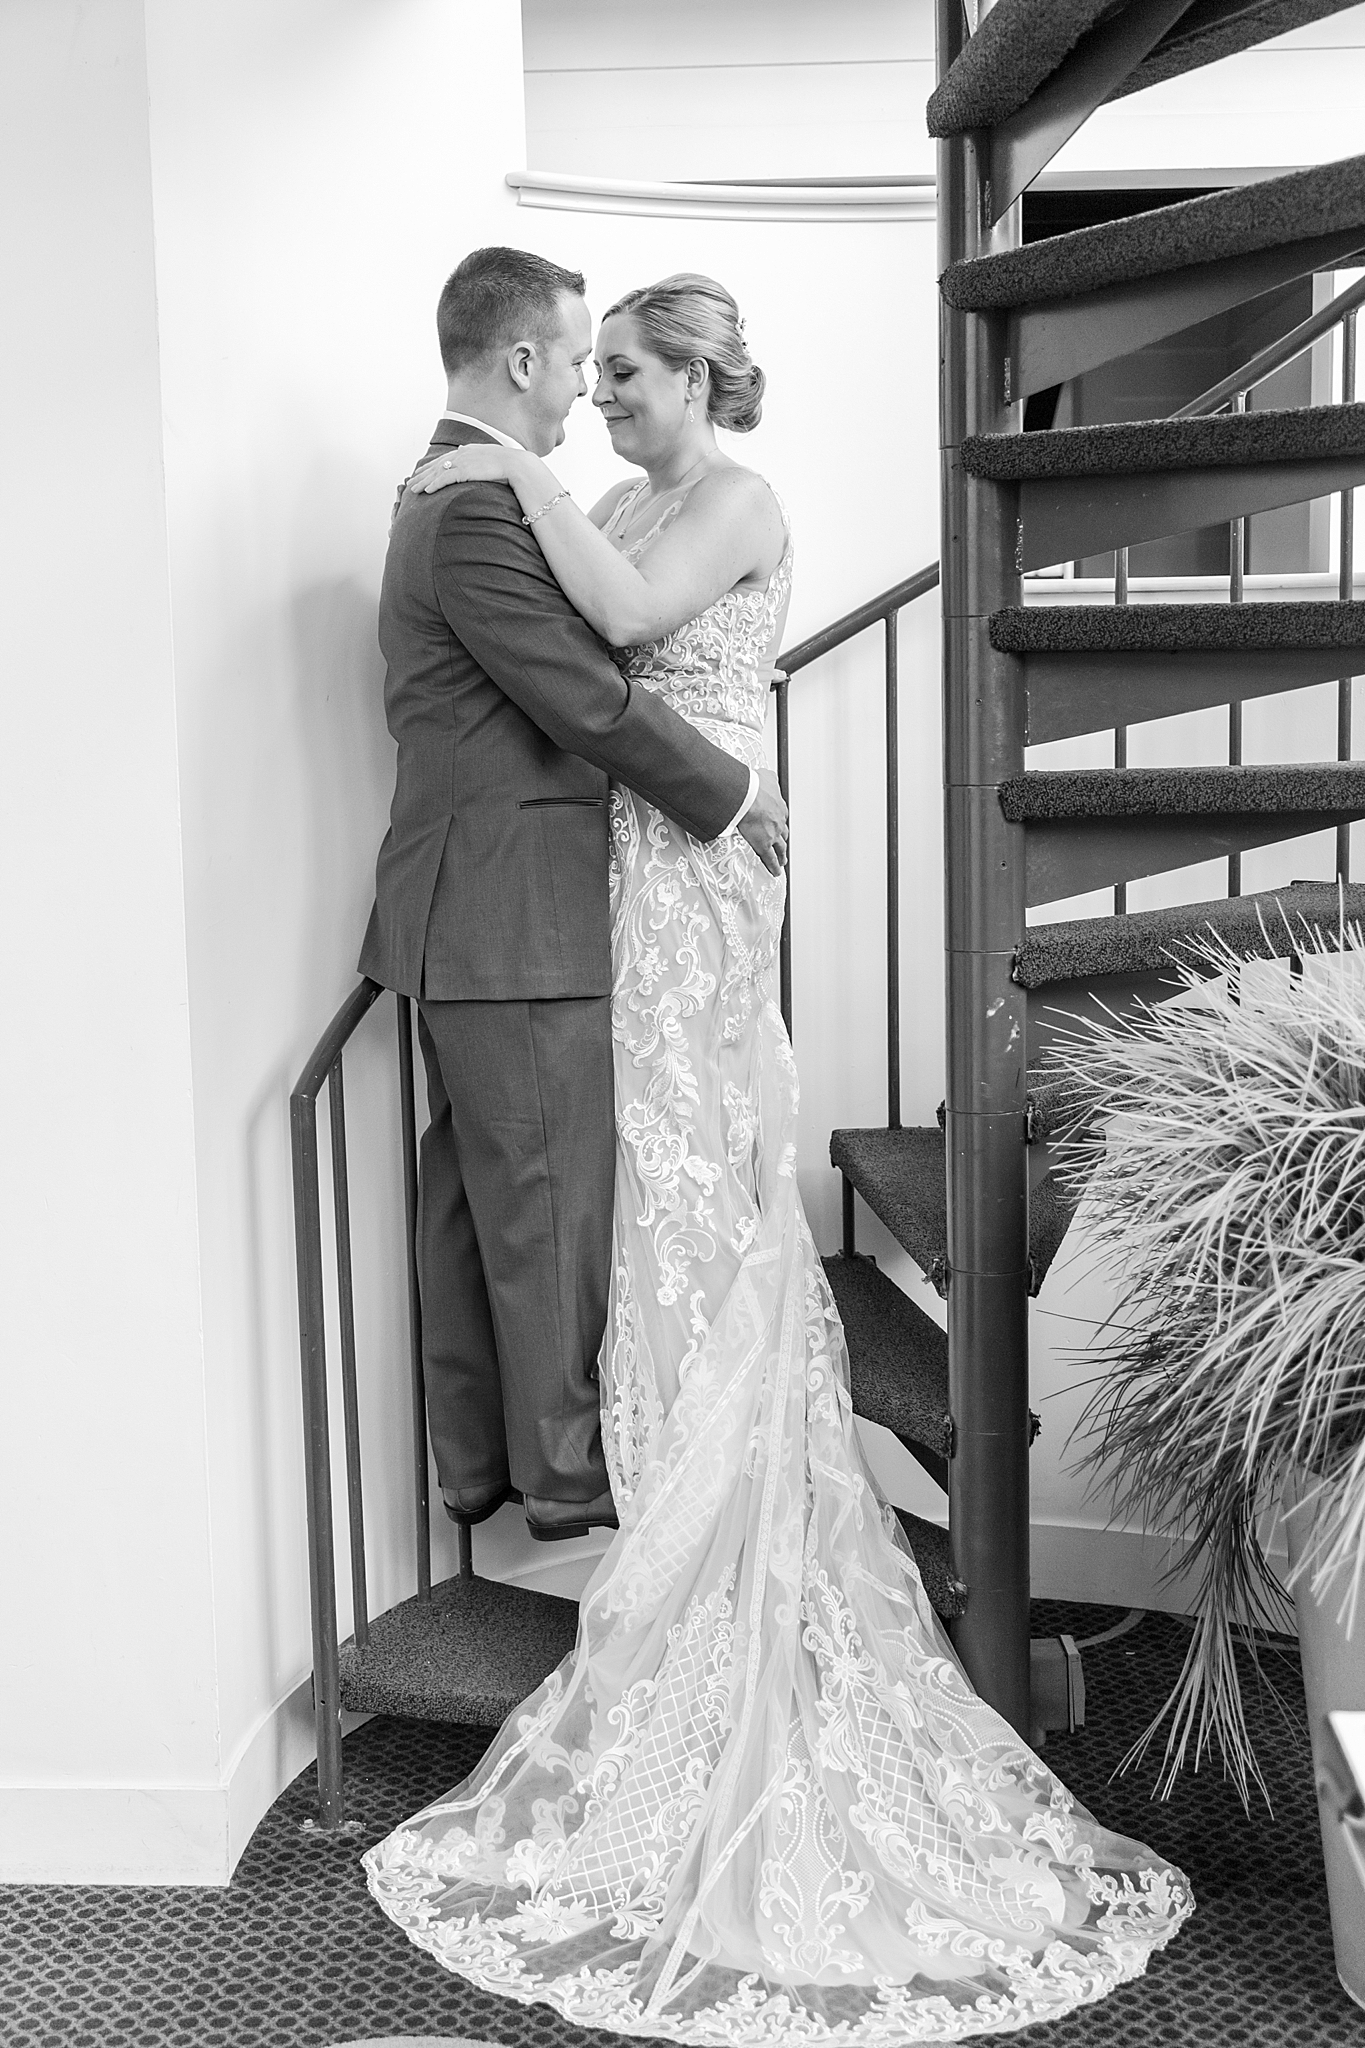 modern-romantic-wedding-photography-at-webers-in-ann-arbor-michigan-by-courtney-carolyn-photography_0033.jpg